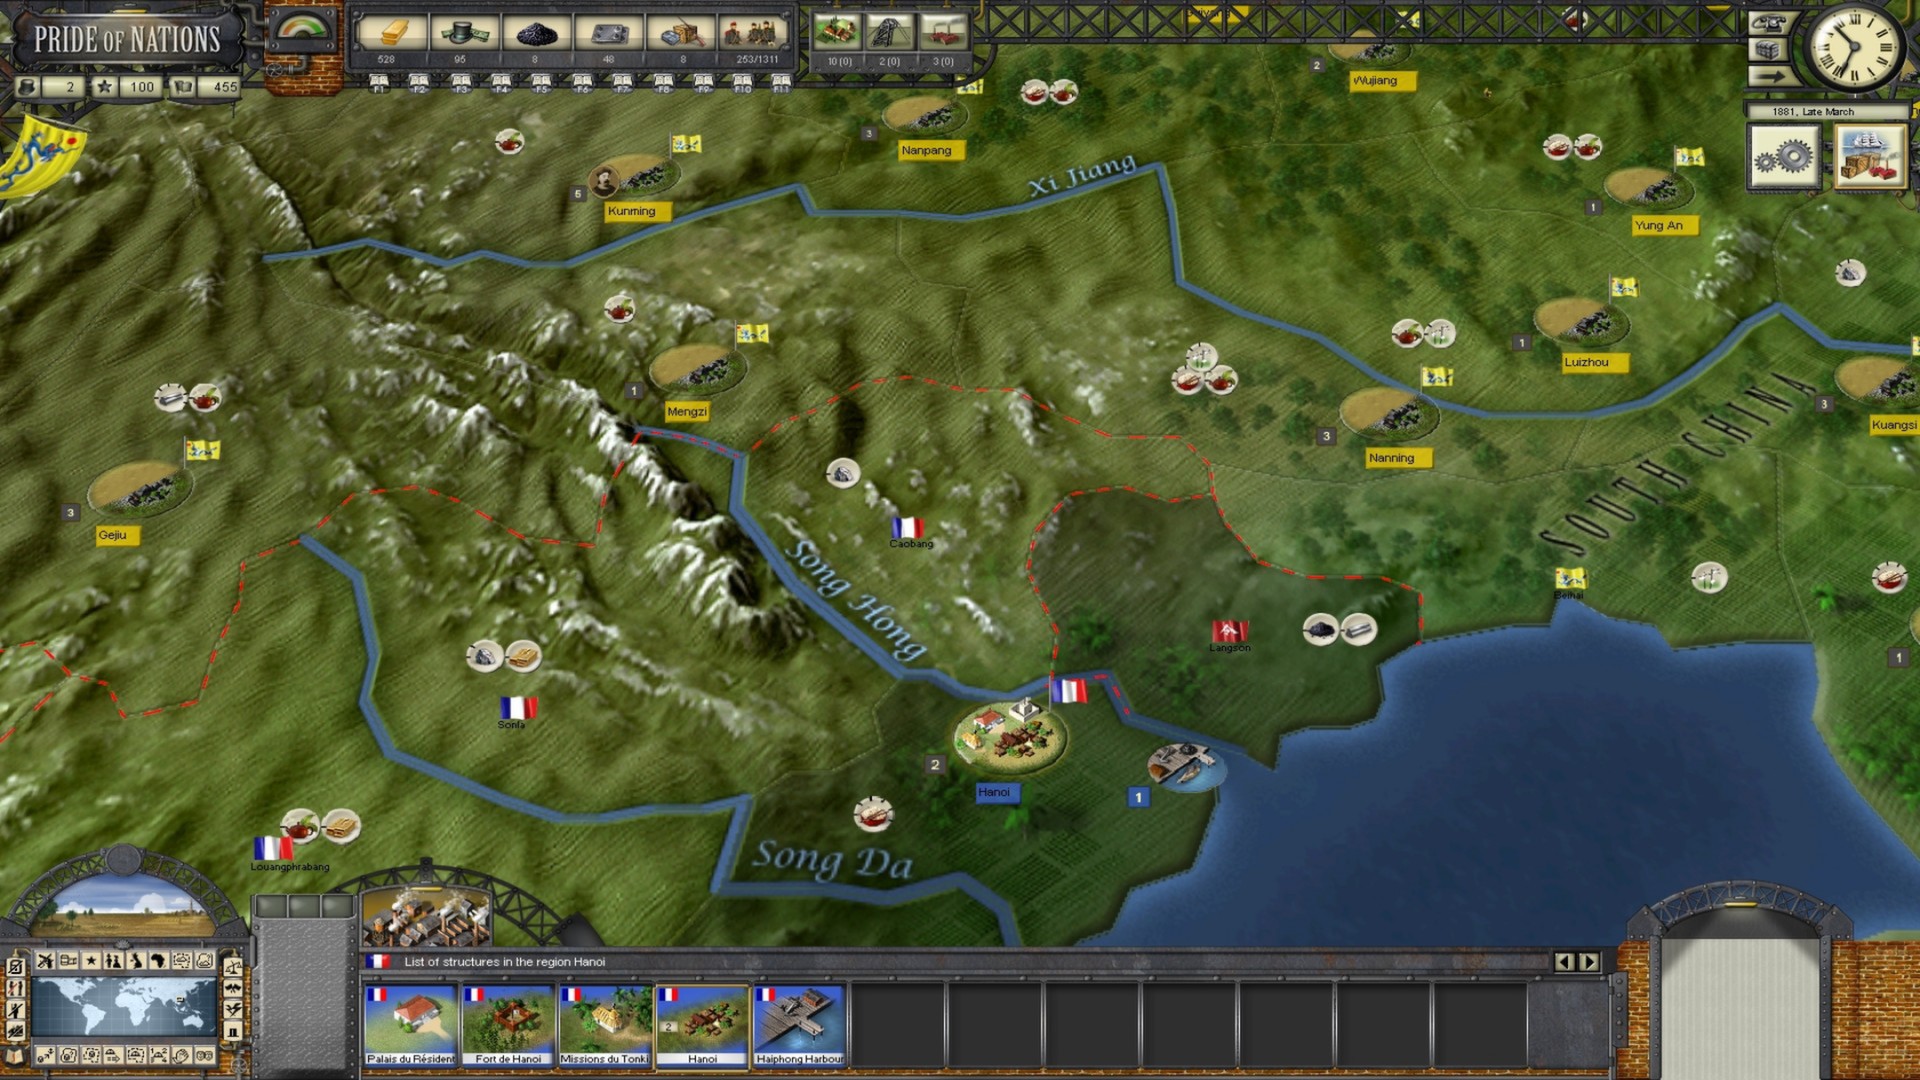 Pride of Nations - The Scramble for Africa DLC Steam CD Key, 4.38 usd